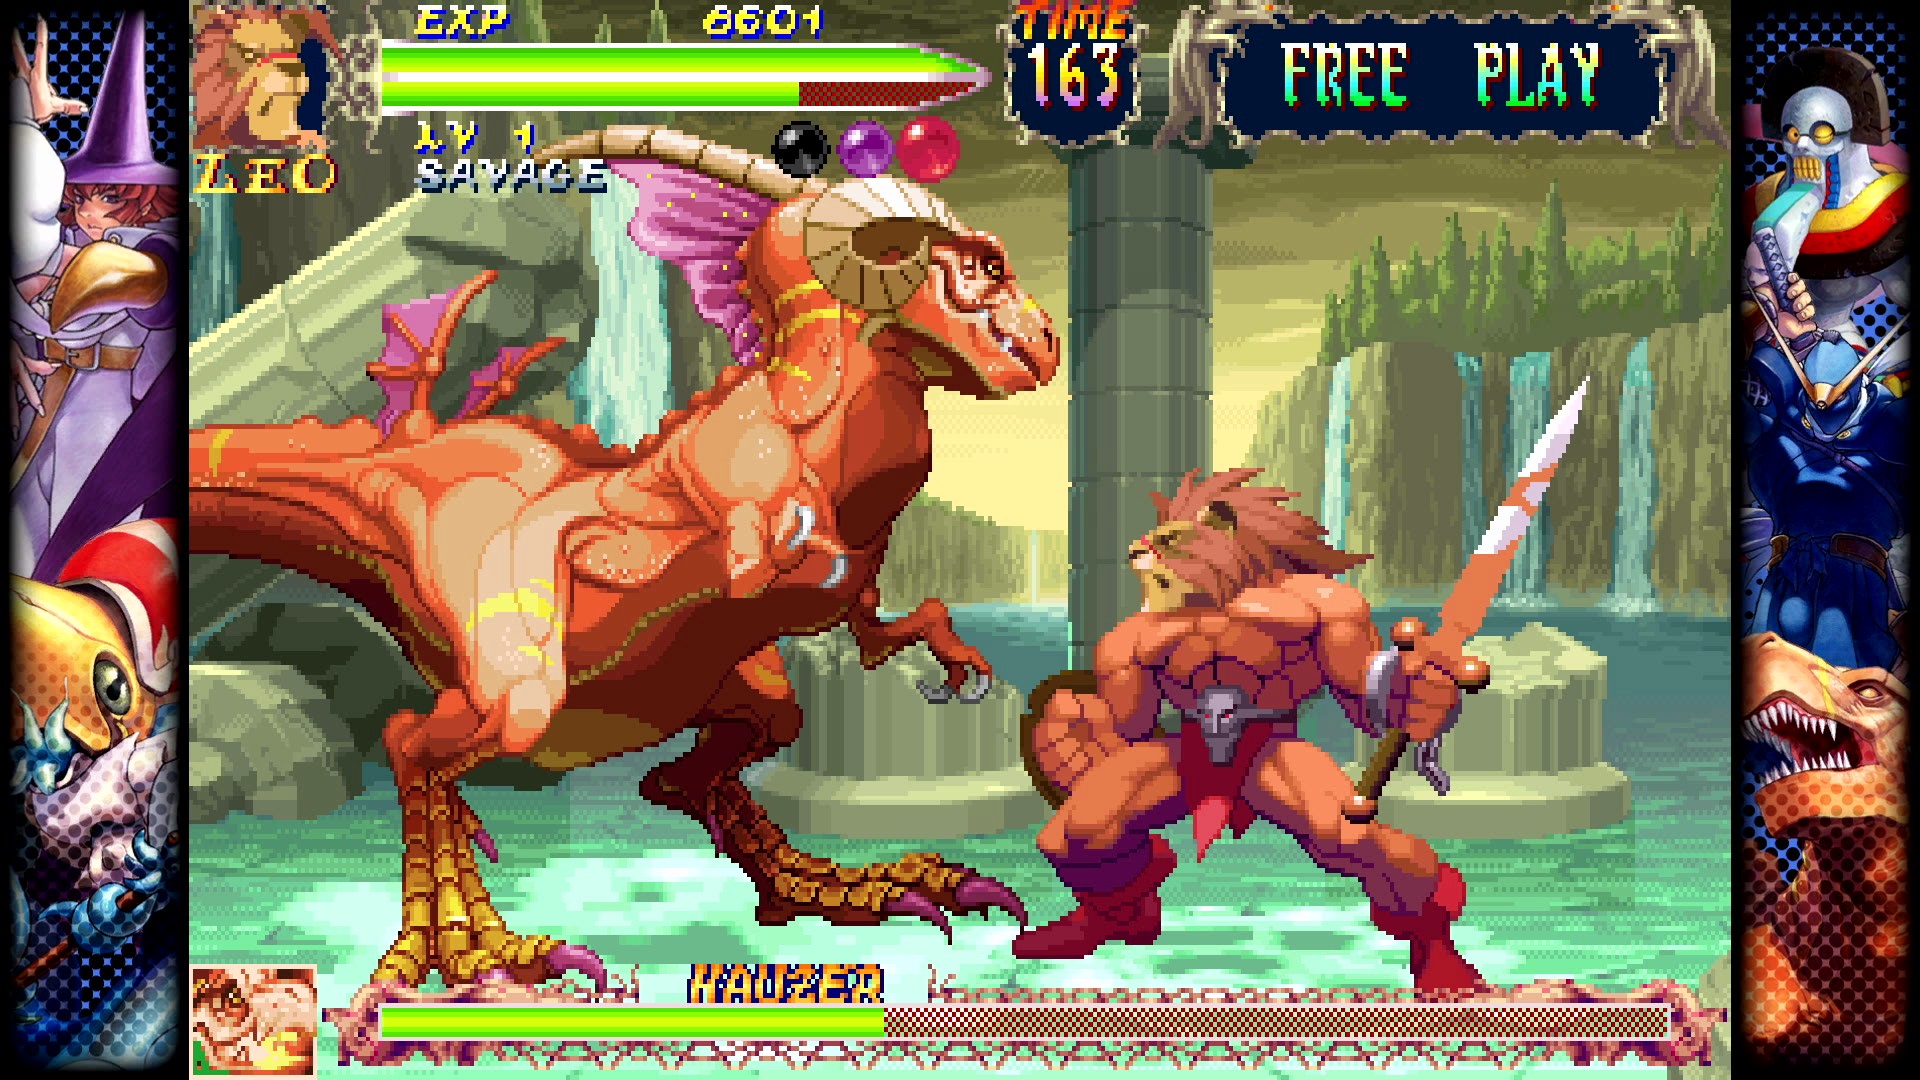 Leo versus Hauzer in Free Play. Leo's is on the right, facing left with his sword drawn.